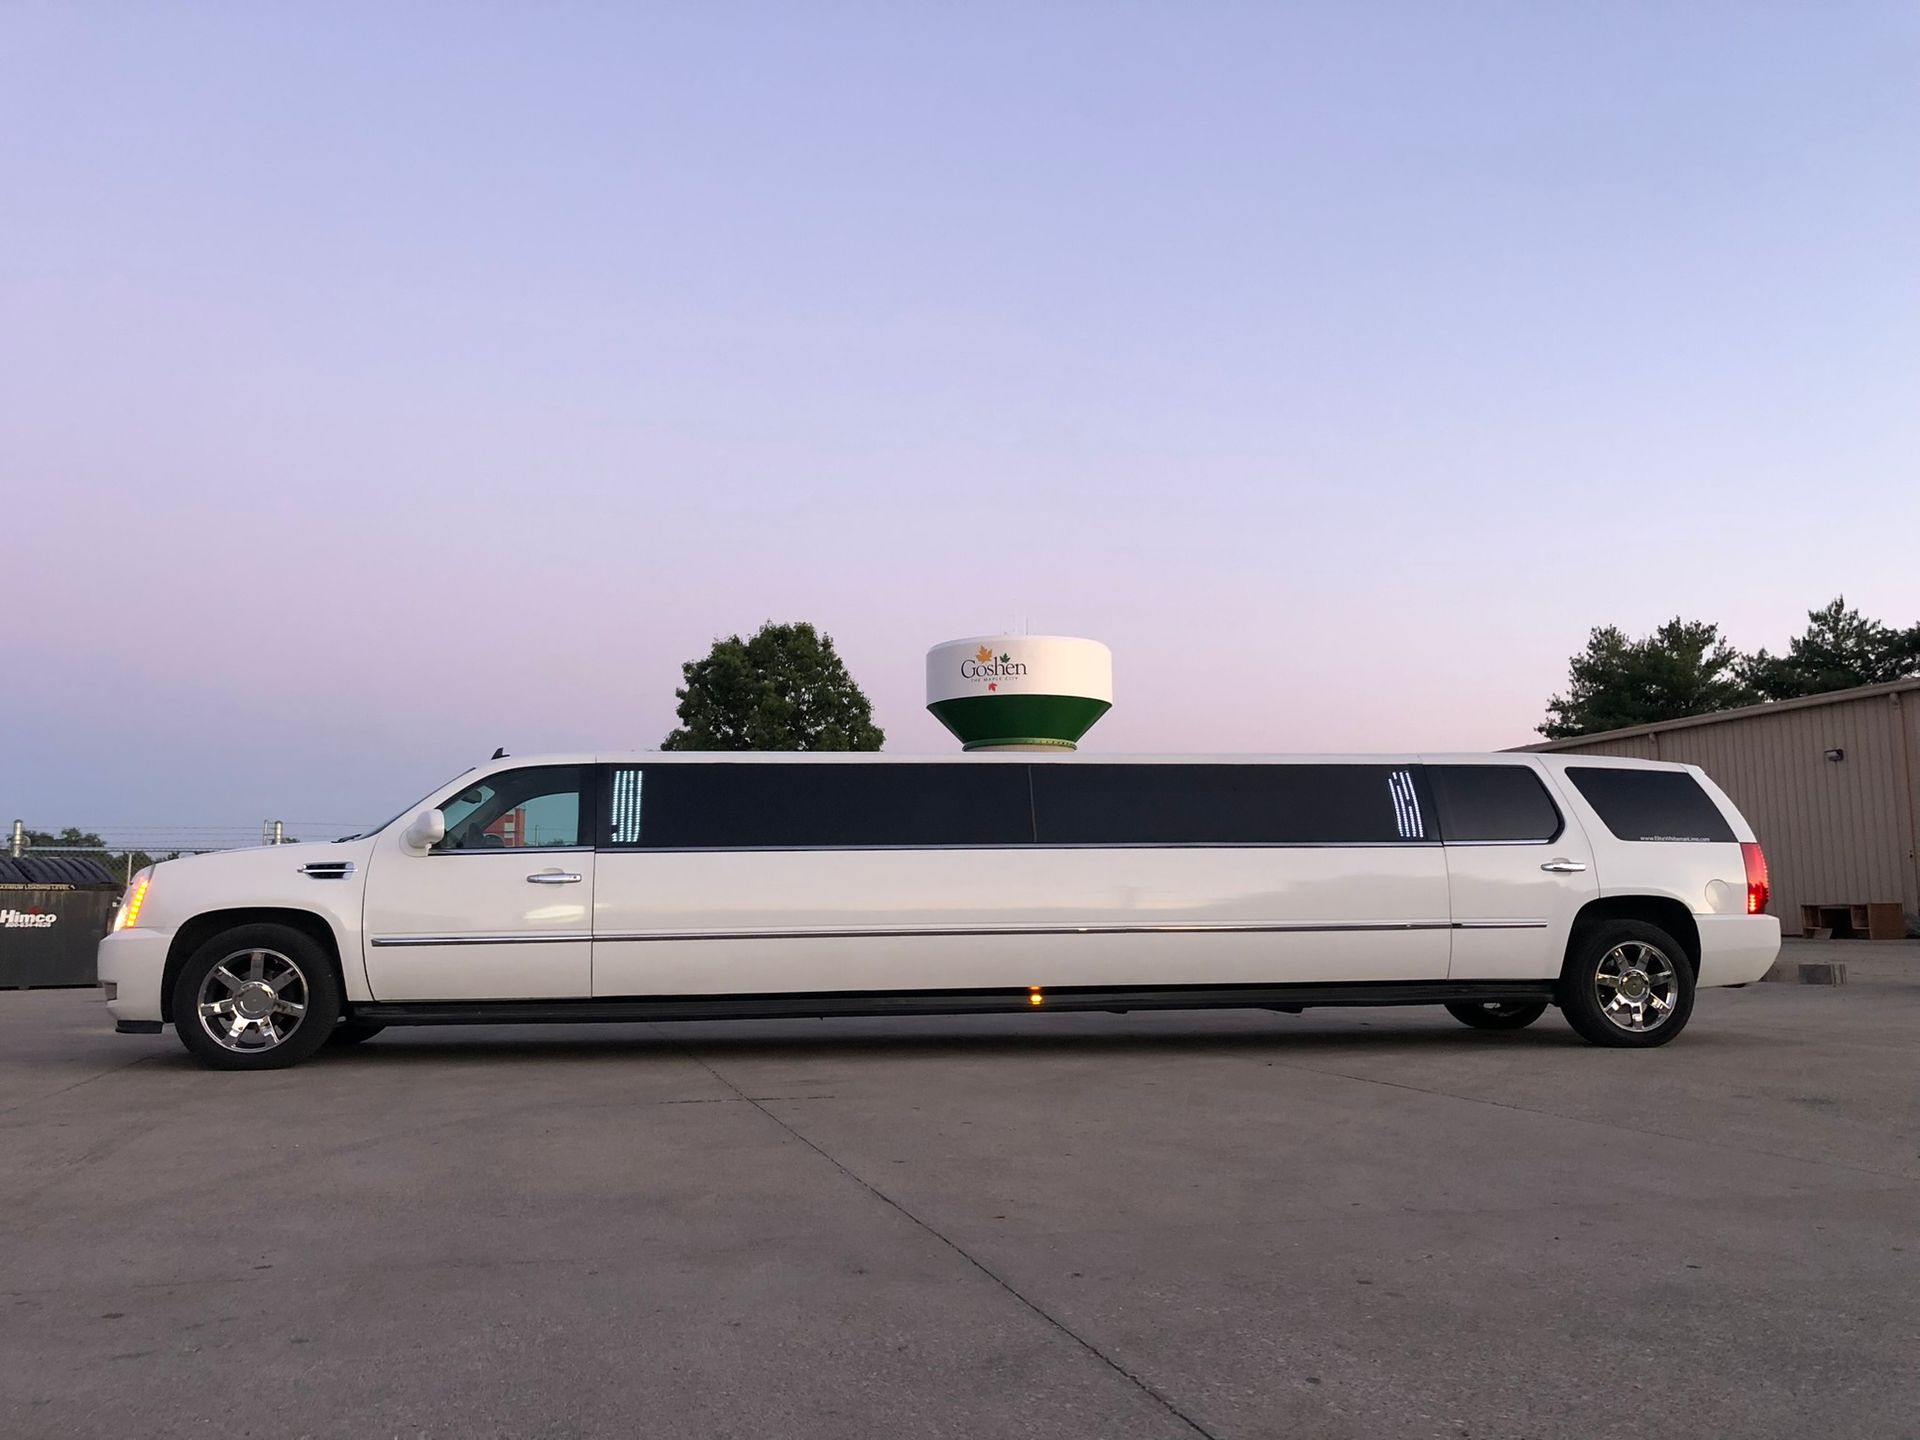 With our airport limo service, you'll get to your destination on time and looking stylish.